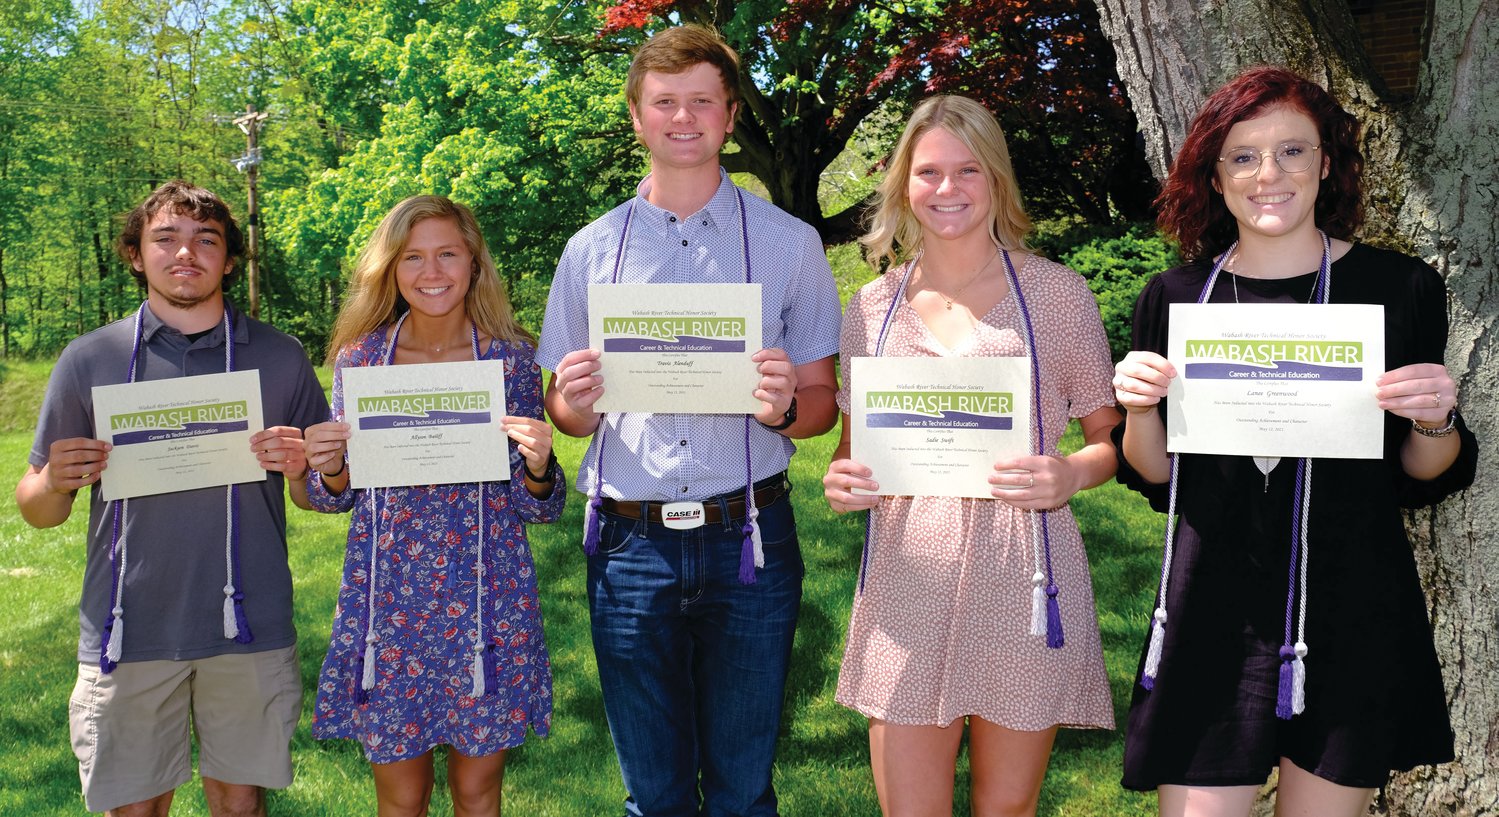 Attica students recently inducted into the Wabash River Technical Honor Society are (L to R) Jackson Davis, Allyson Bailiff, Travis Alenduff, Sadie Swift and Lanee Greenwood.